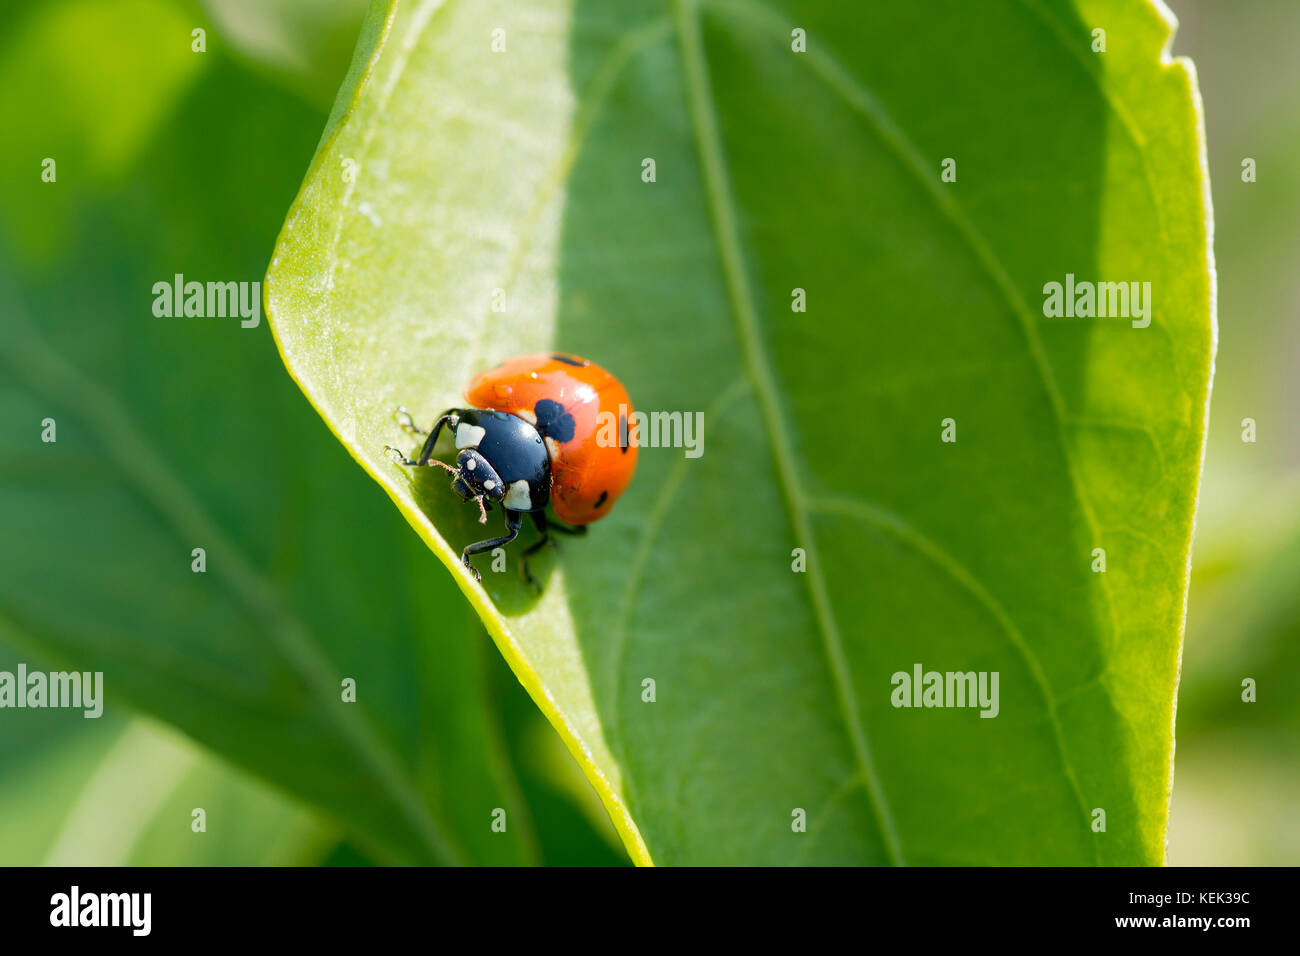 Closeup photo of a ladybug climbing a green leaf on a sunny day with a blurred background Stock Photo